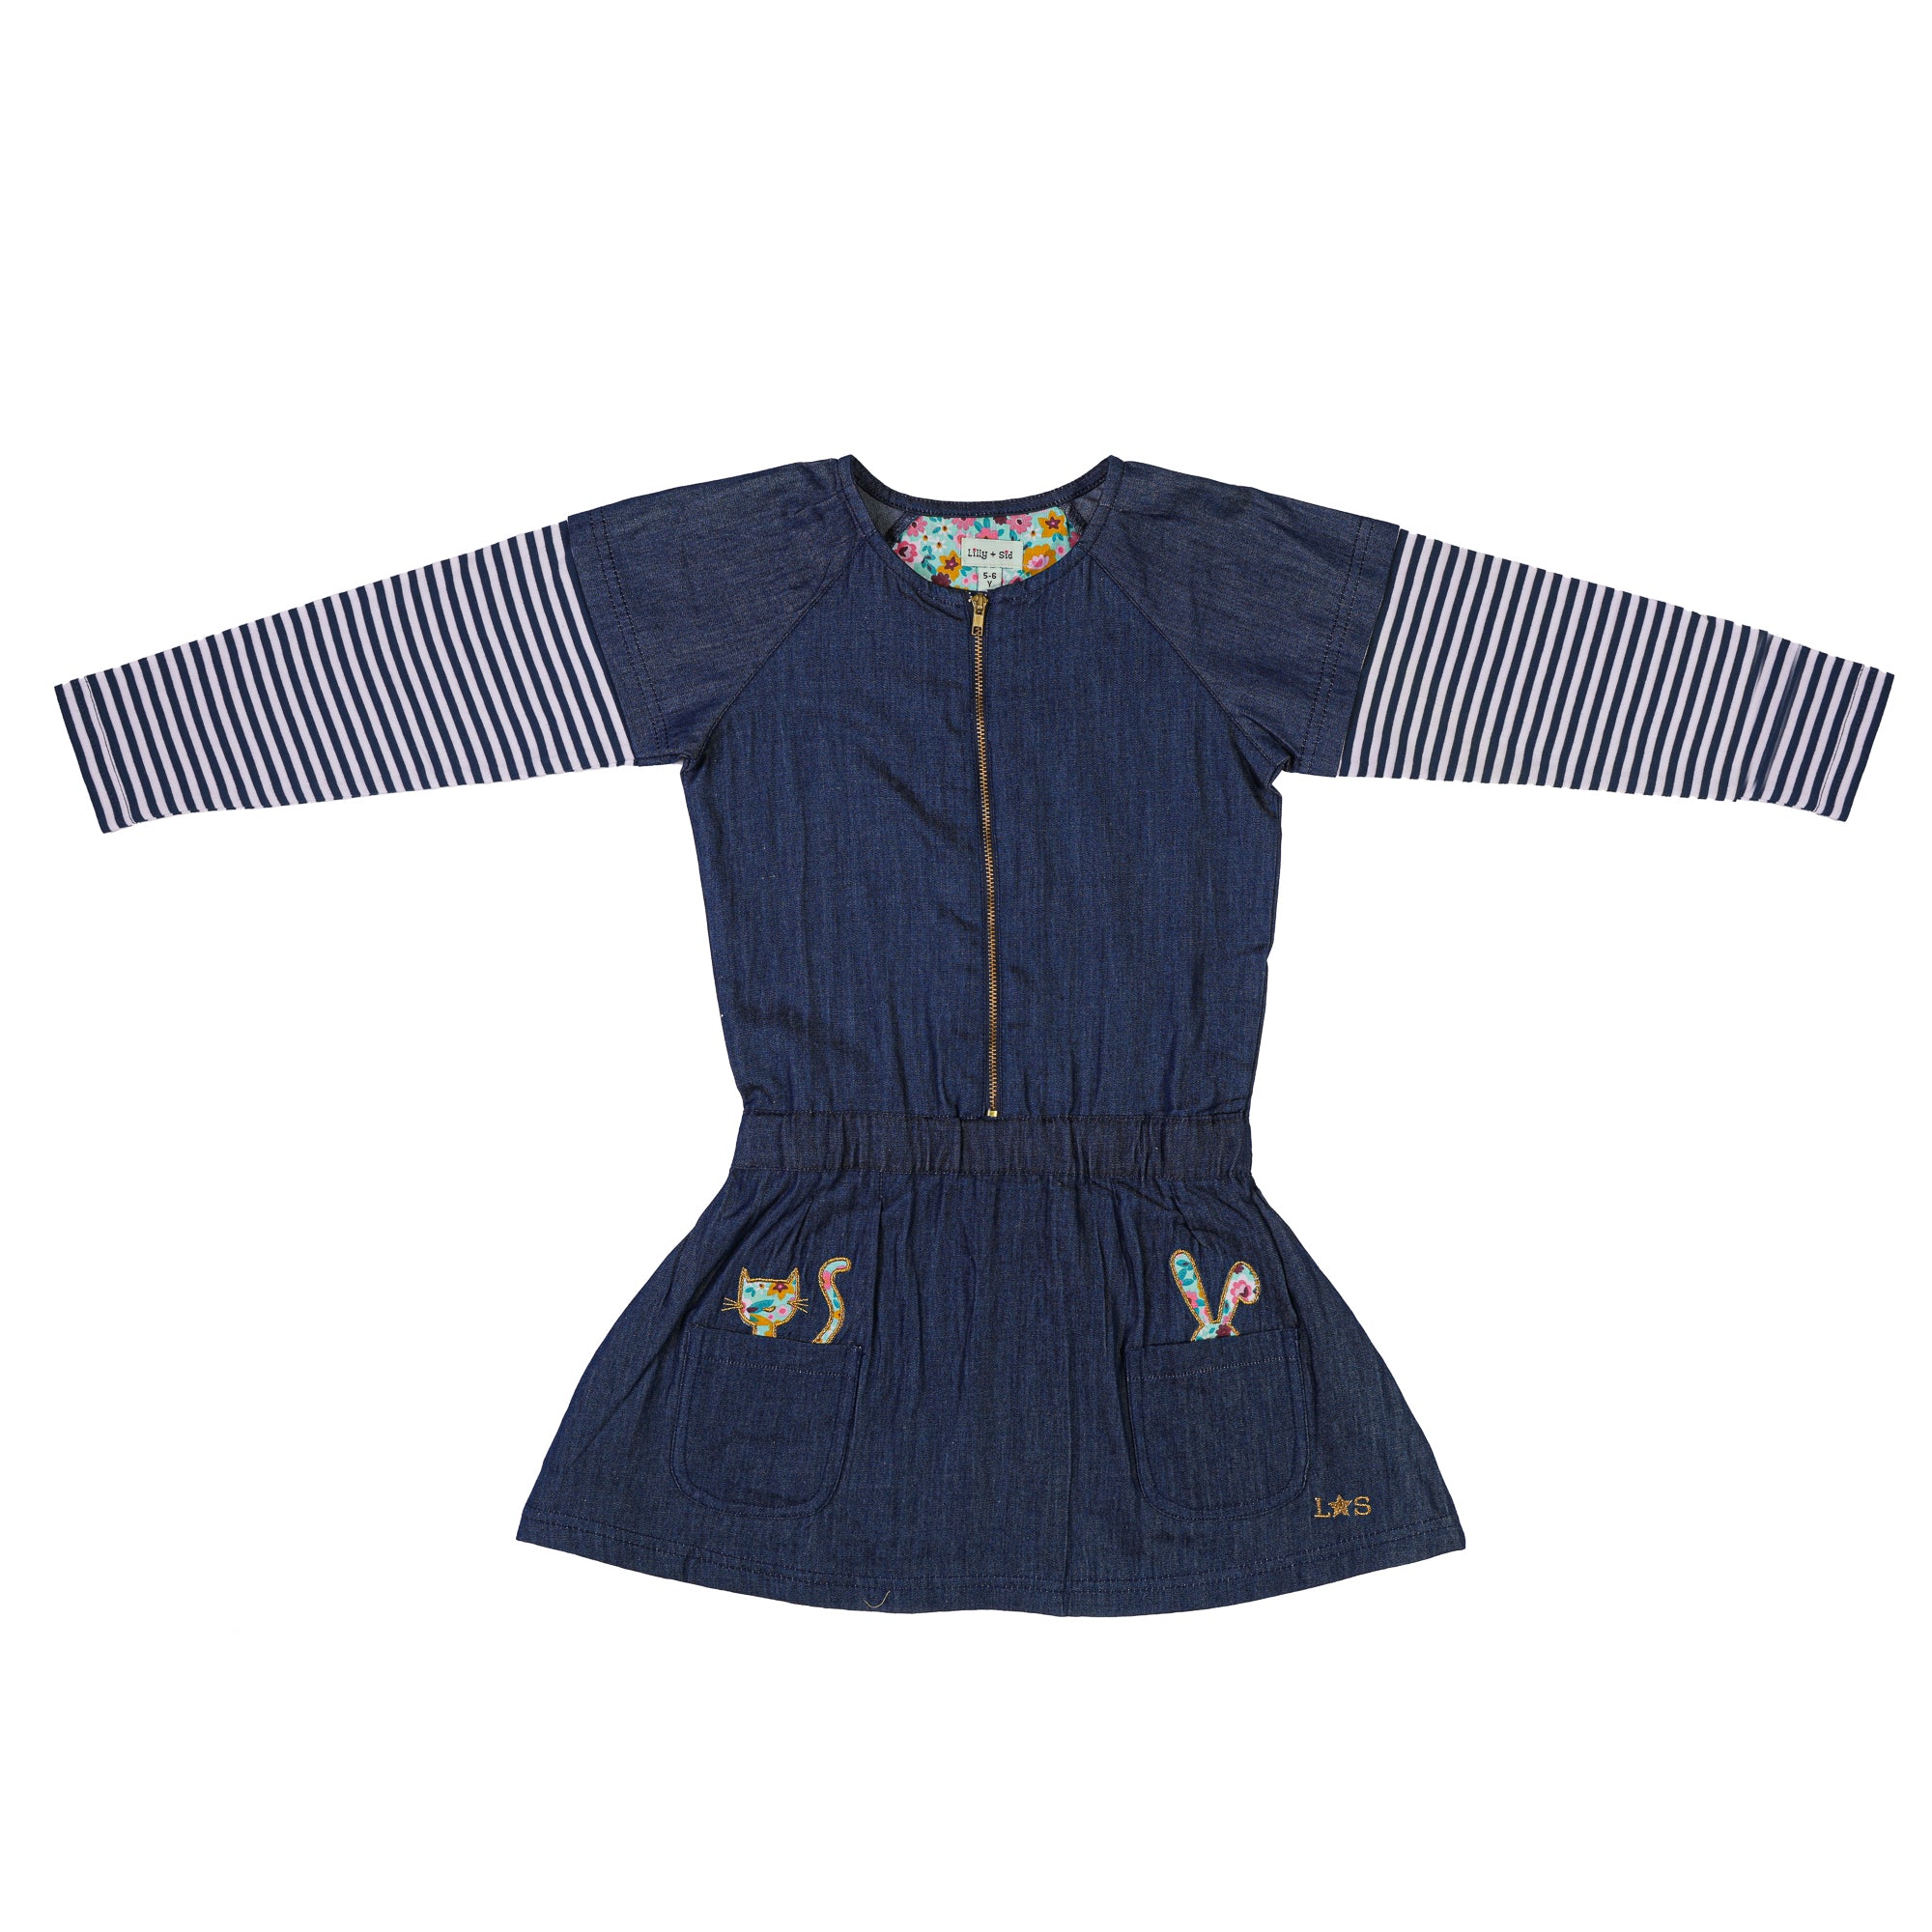 long sleeve cotton denim dress with navy stripes, zipper on the and 2 appliques on the front pockets